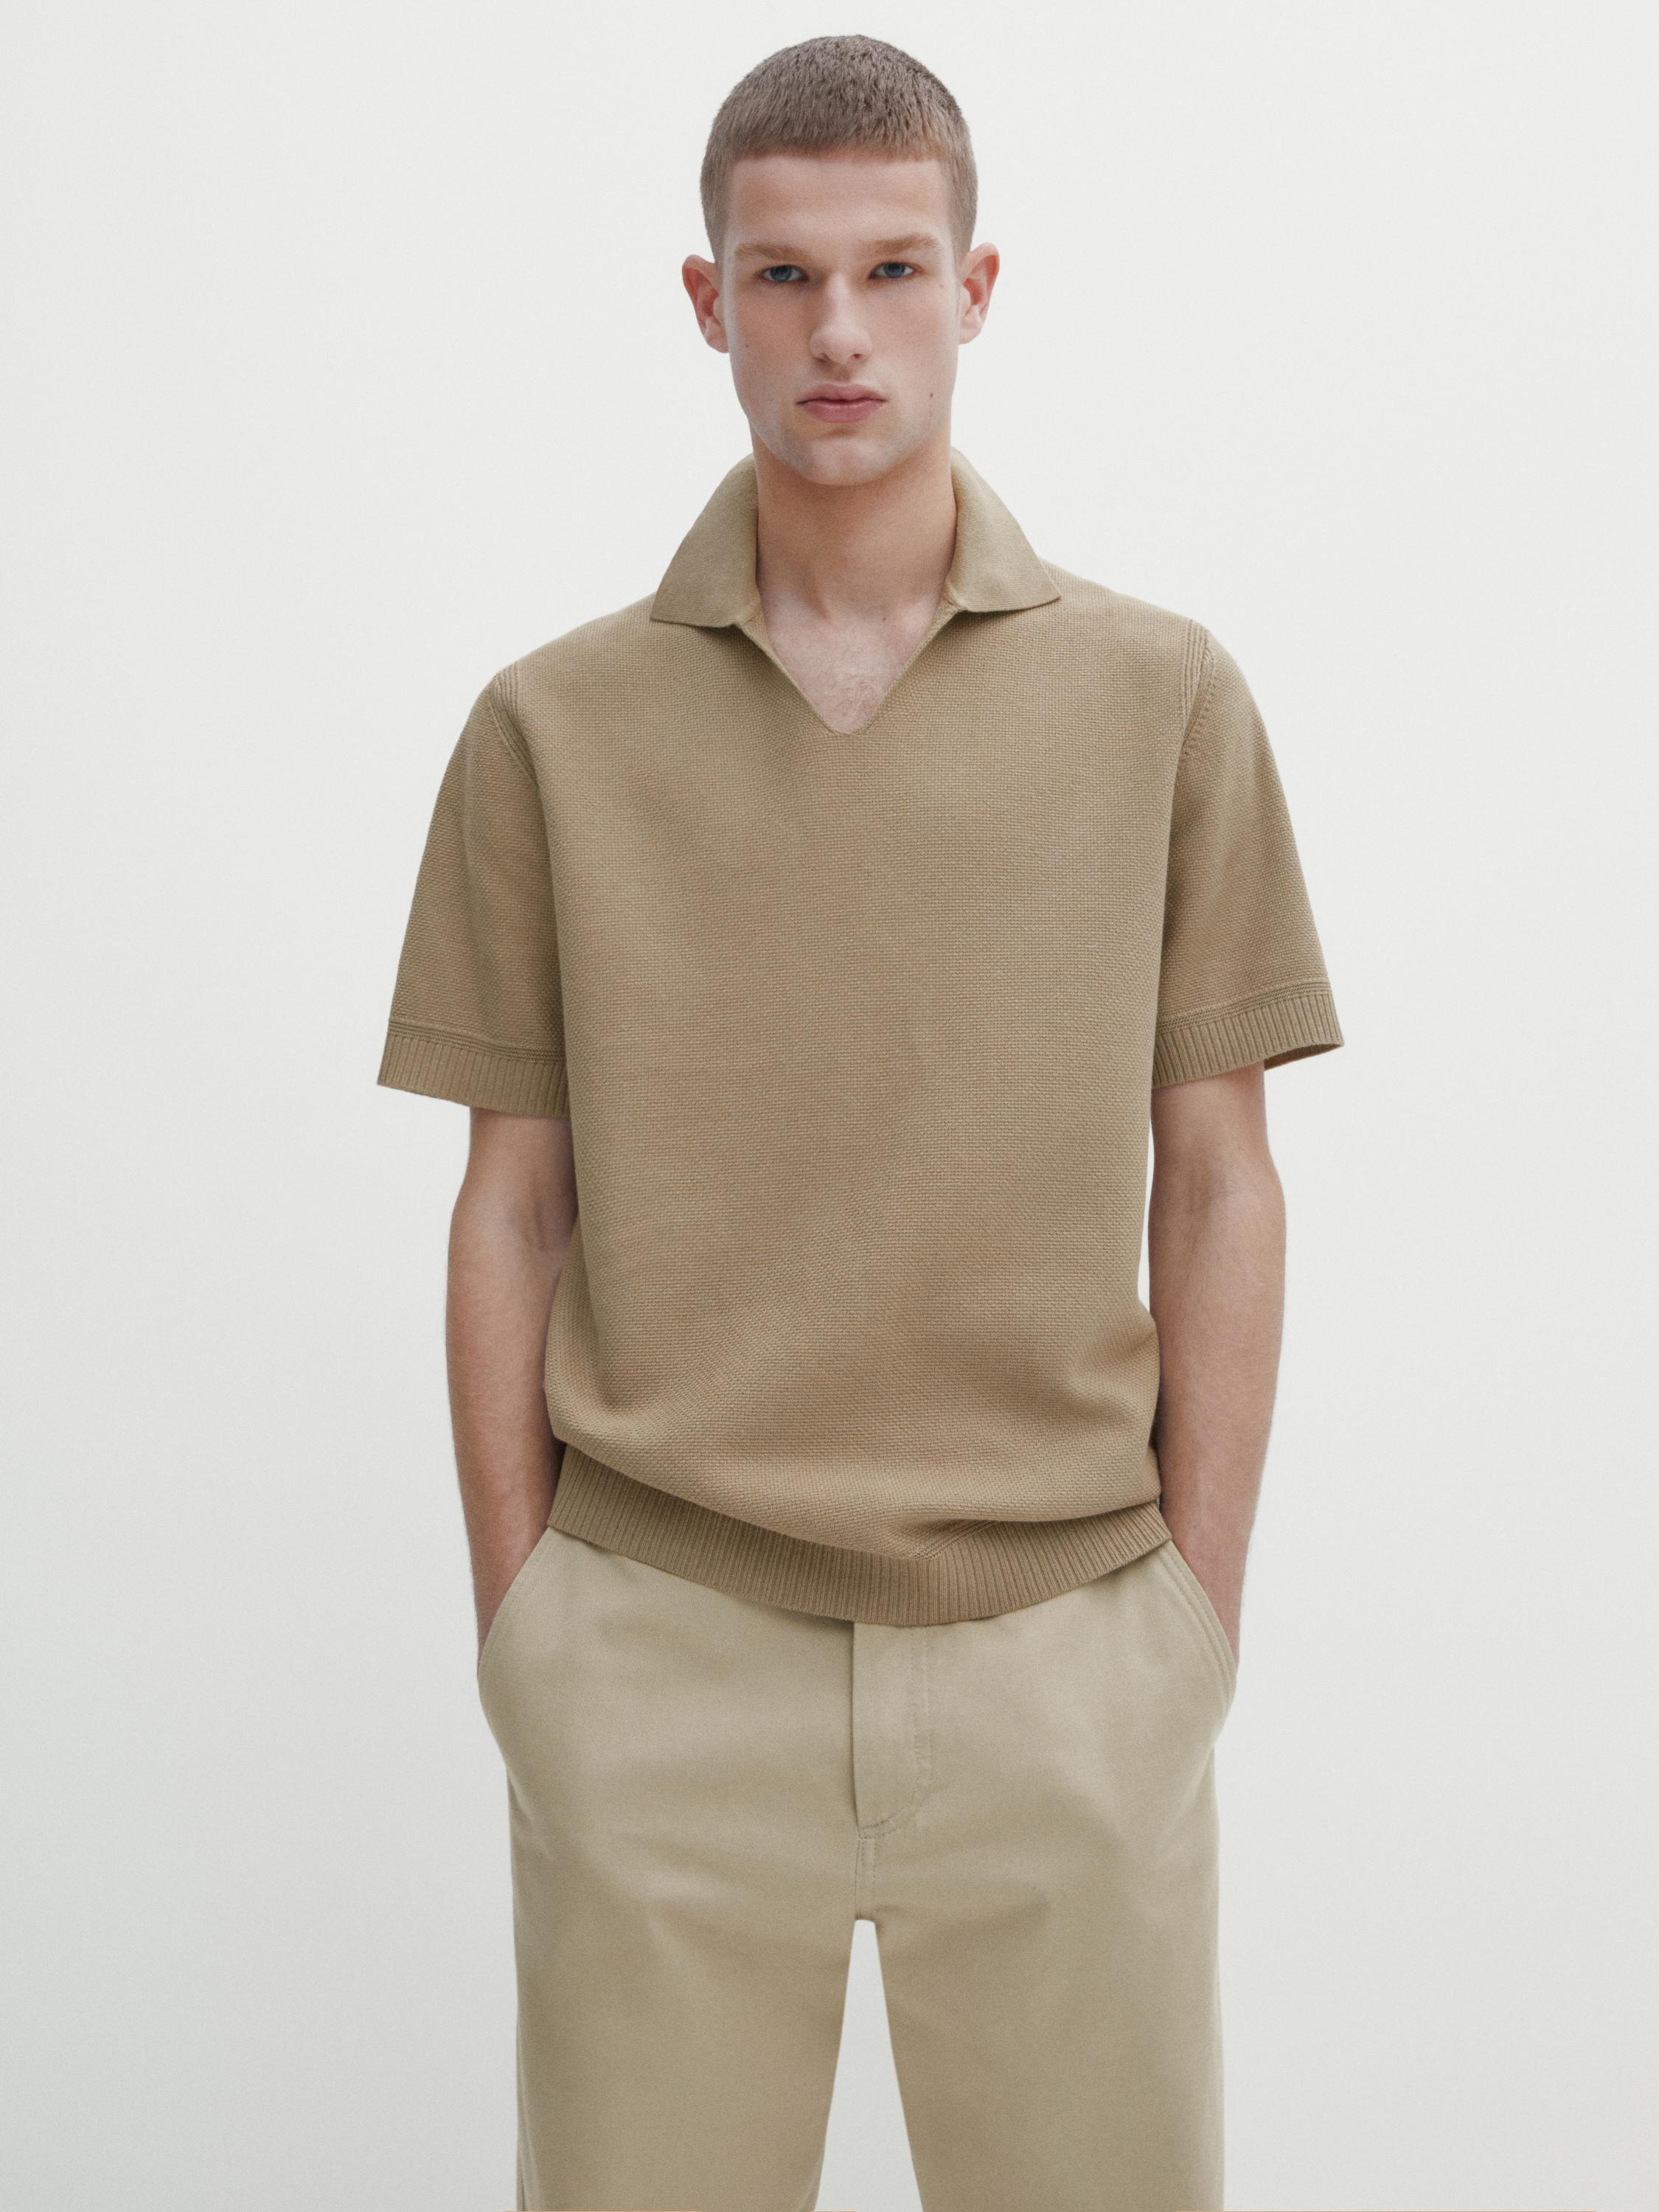 Knit polo sweater with short sleeves - Stone | ZARA United States